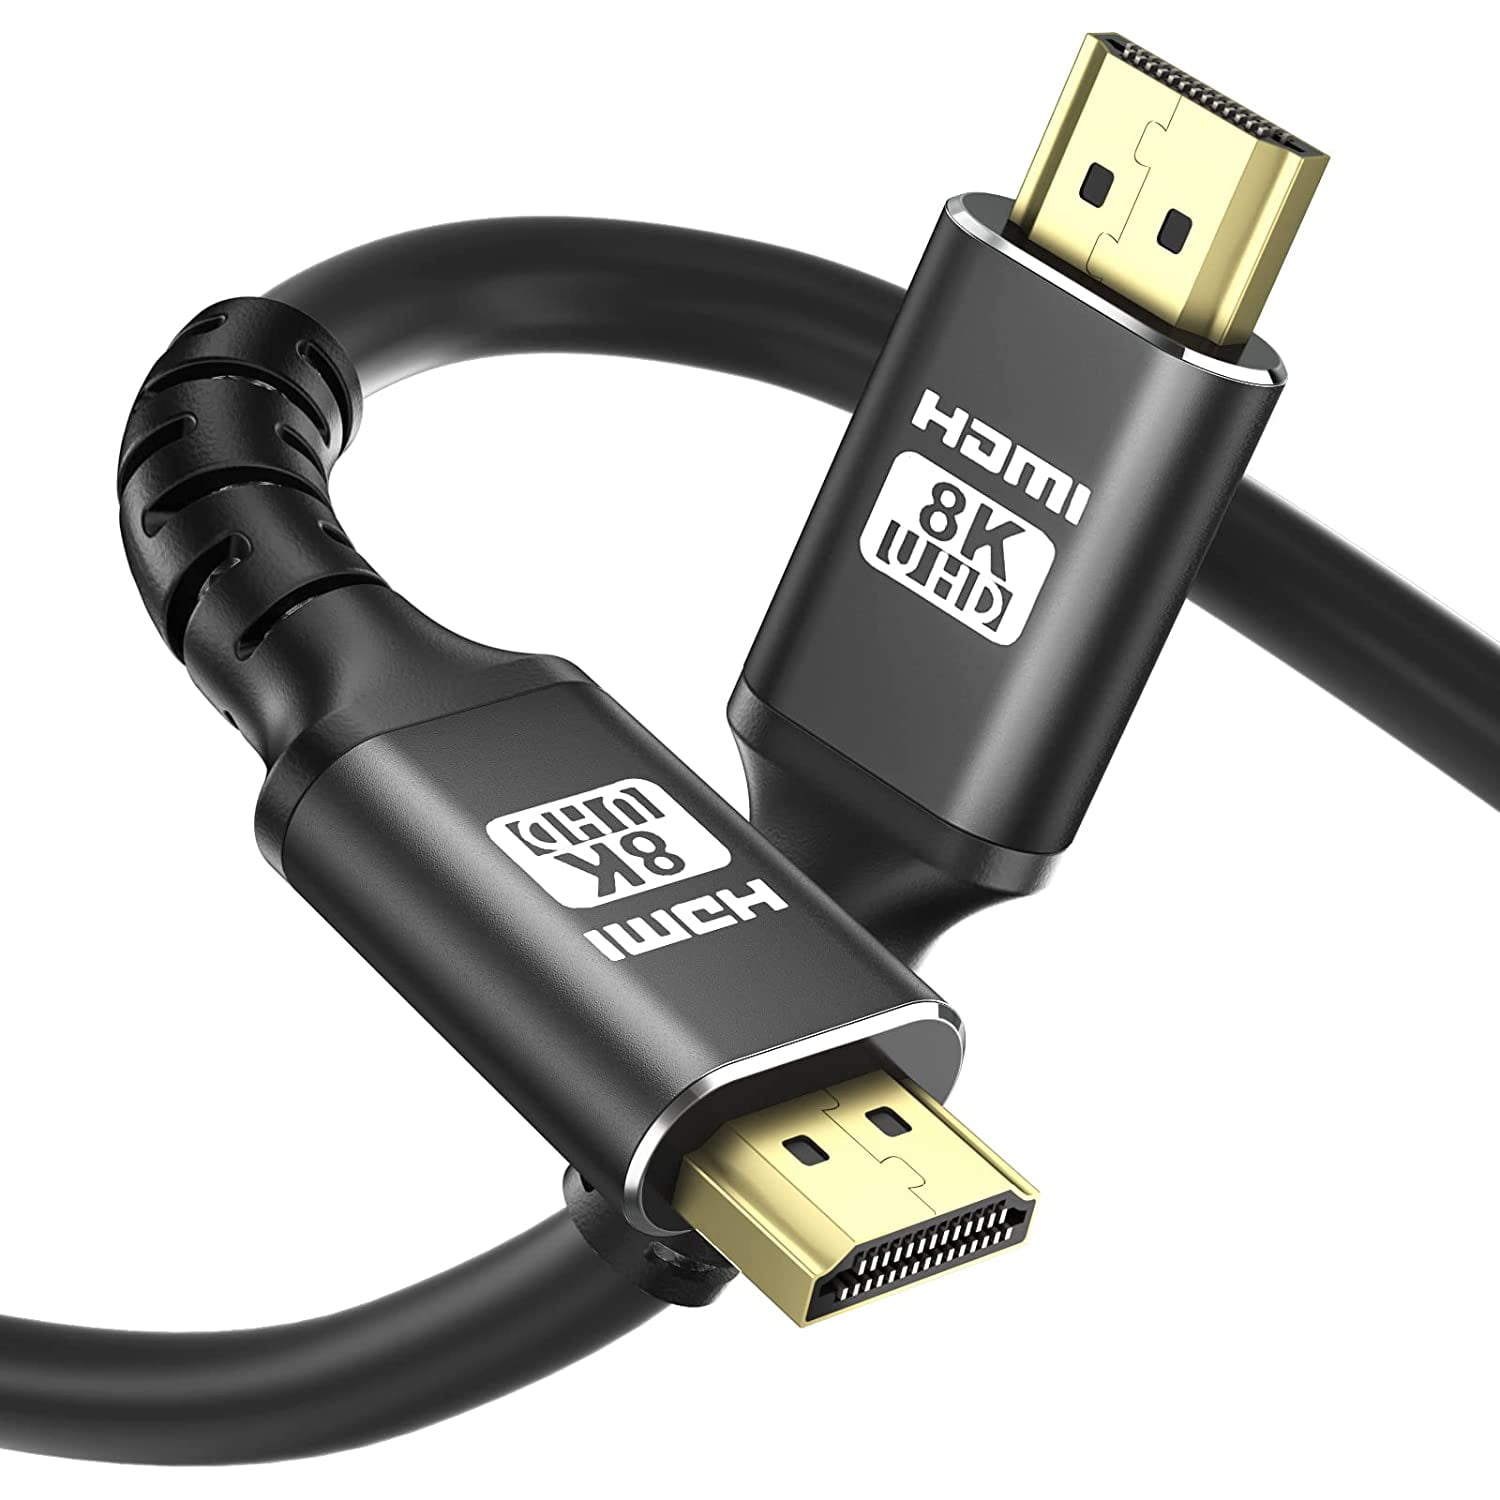 6ft 2m Certified HDMI 2.1 Cable - 8K/4K - HDMI® Cables & HDMI Adapters